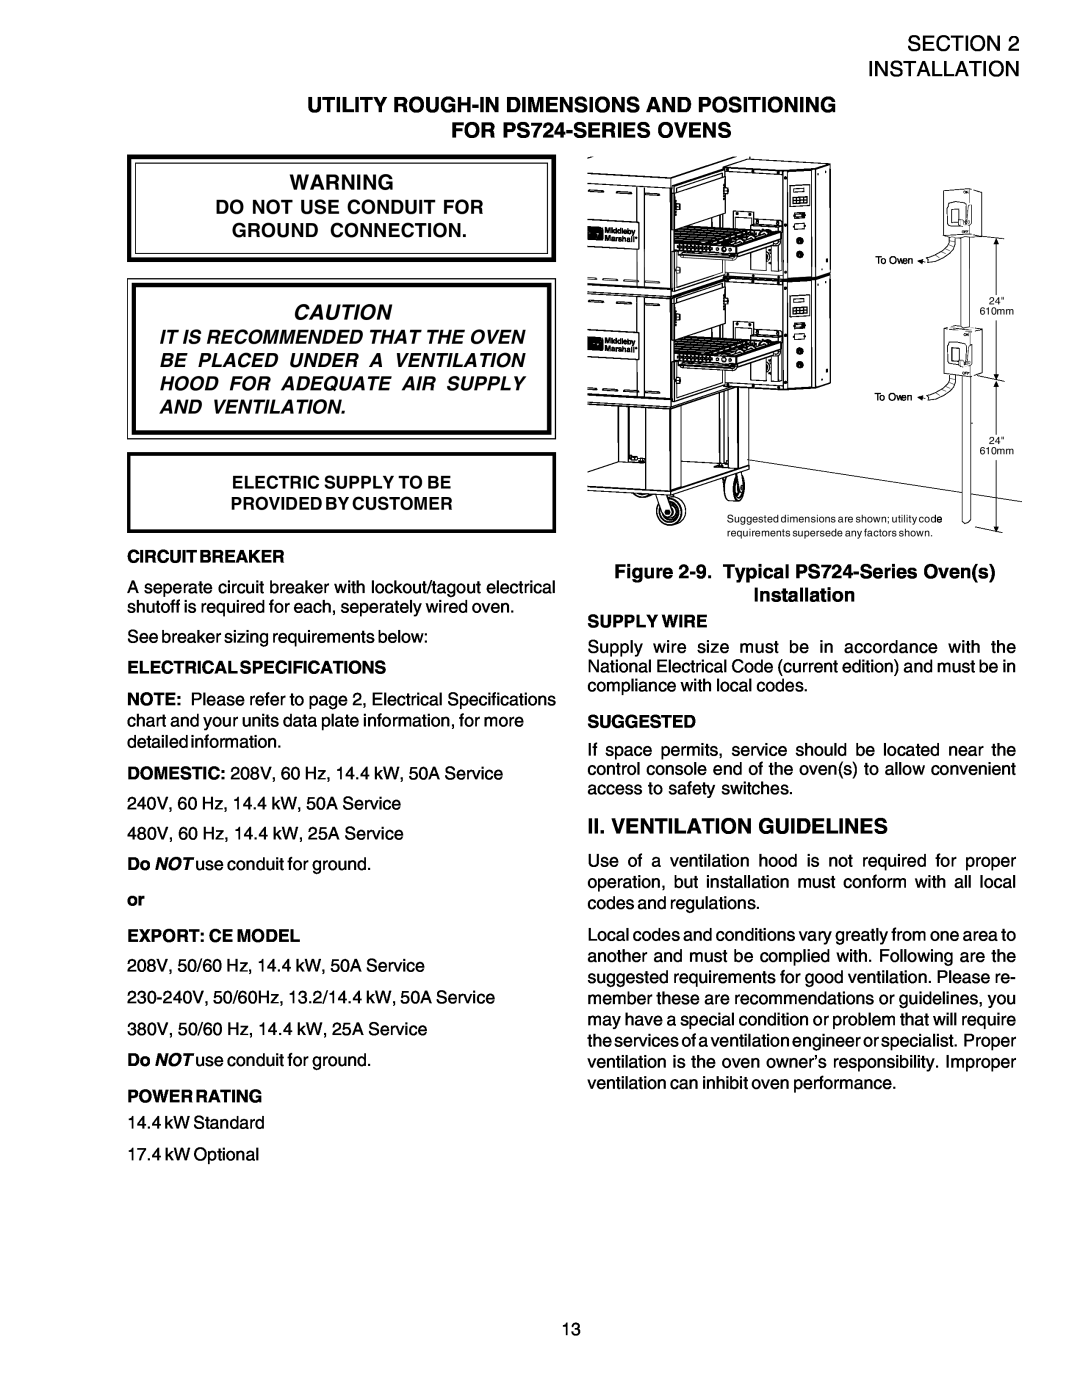 Middleby Marshall PS724E UTILITY ROUGH-IN DIMENSIONS AND POSITIONING FOR PS724-SERIES OVENS, Ii. Ventilation Guidelines 